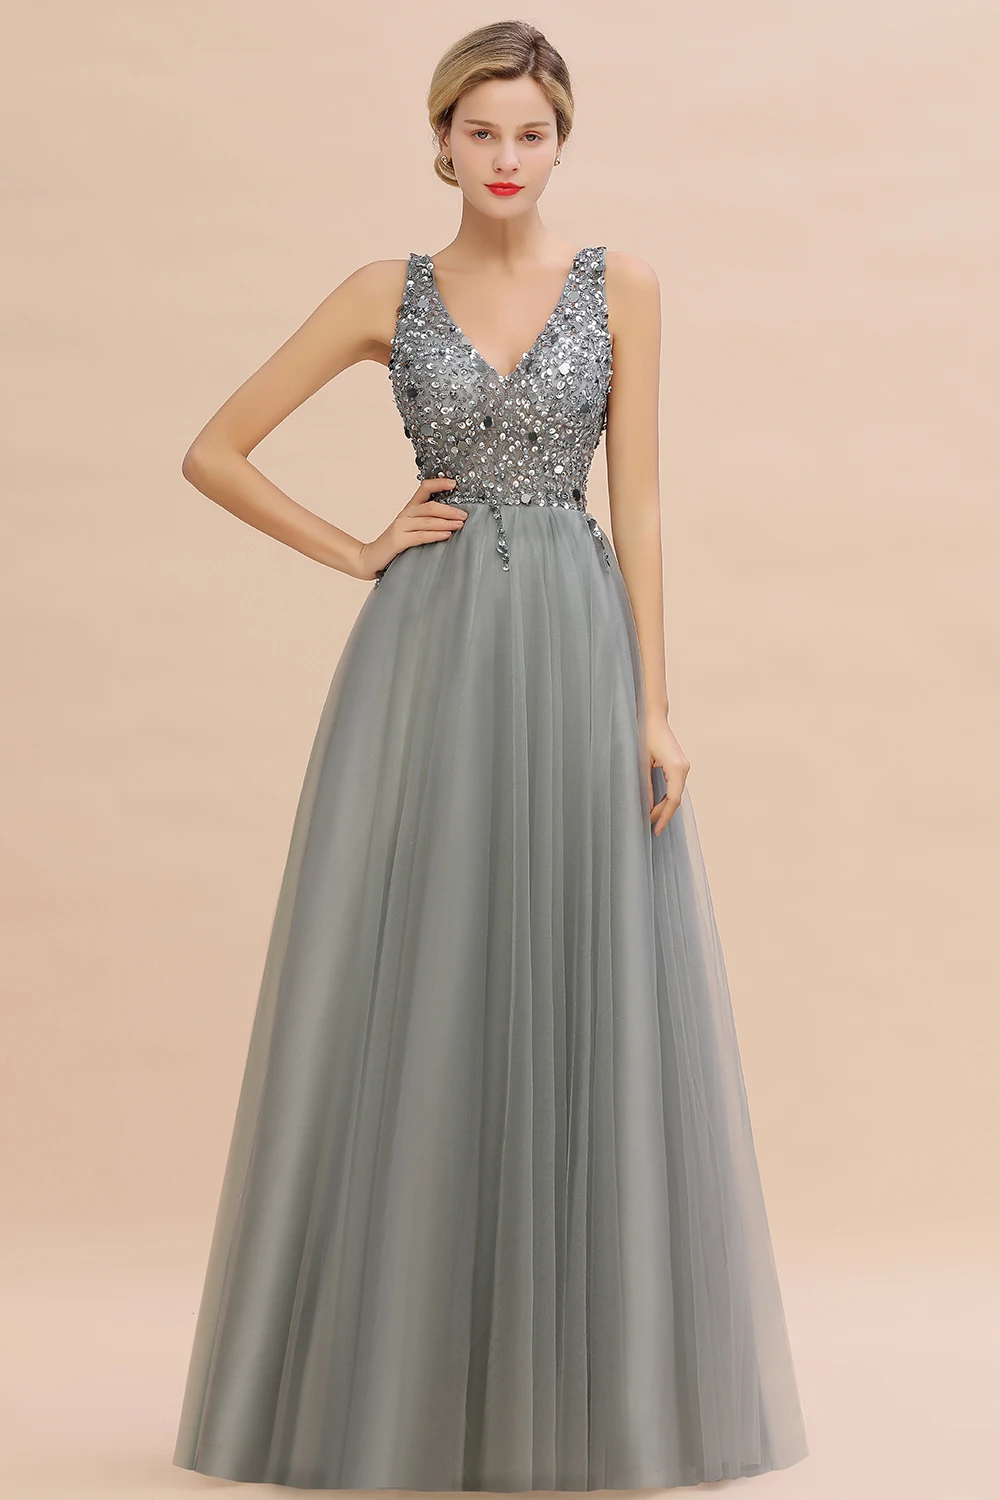 BABYONLINE A-line Prom Dress with Layers Skirt in Glittering Tulle Scroll Lace Bodice V-neck with Thin Straps Sliver Gray Gown